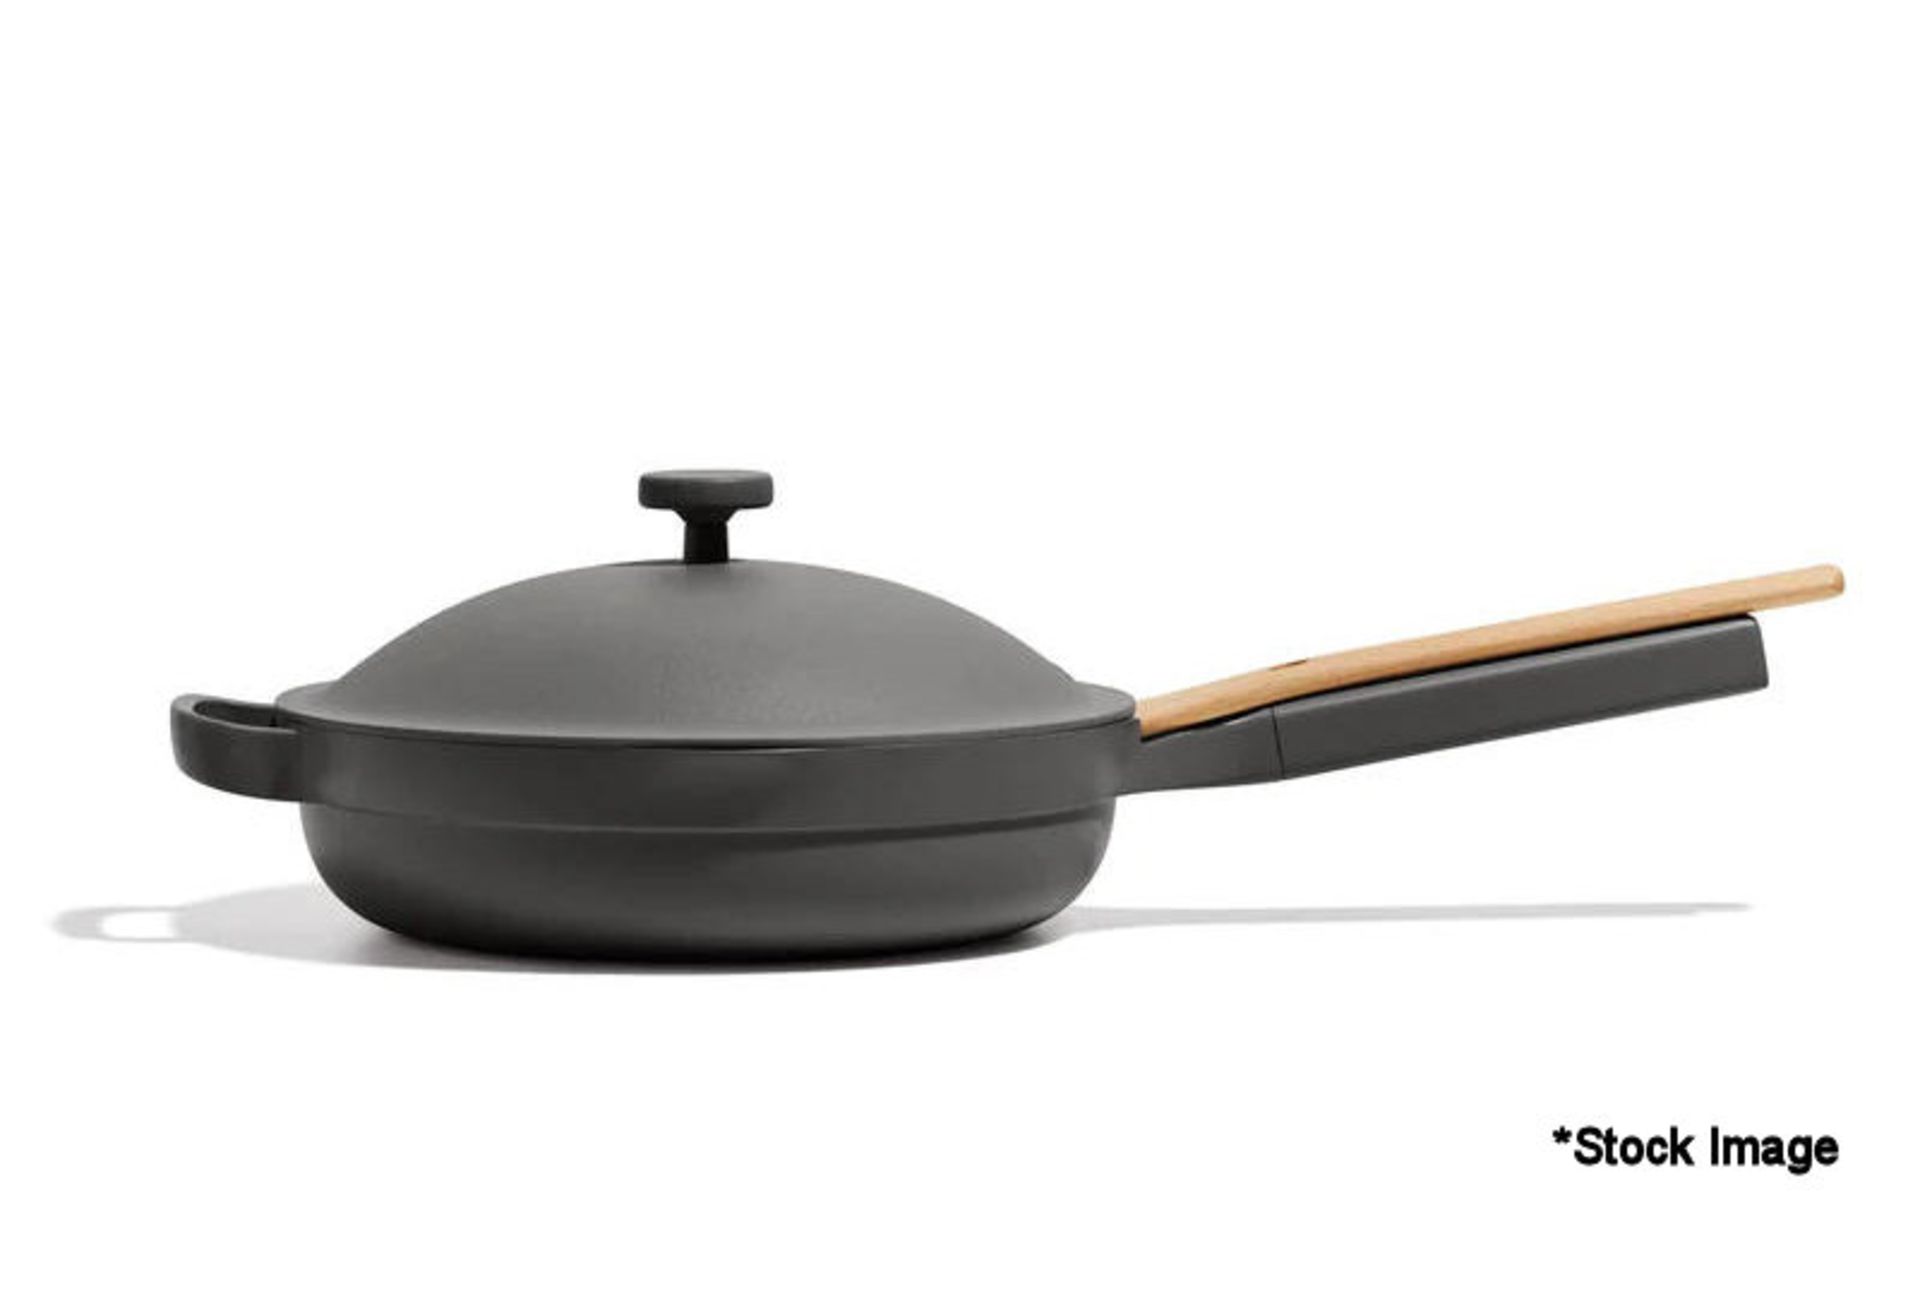 1 x OUR PLACE Our Place Cast Iron Always Pan In Charcoal - RRP £135 - Ref: 7260391/HOC165/HC6 -